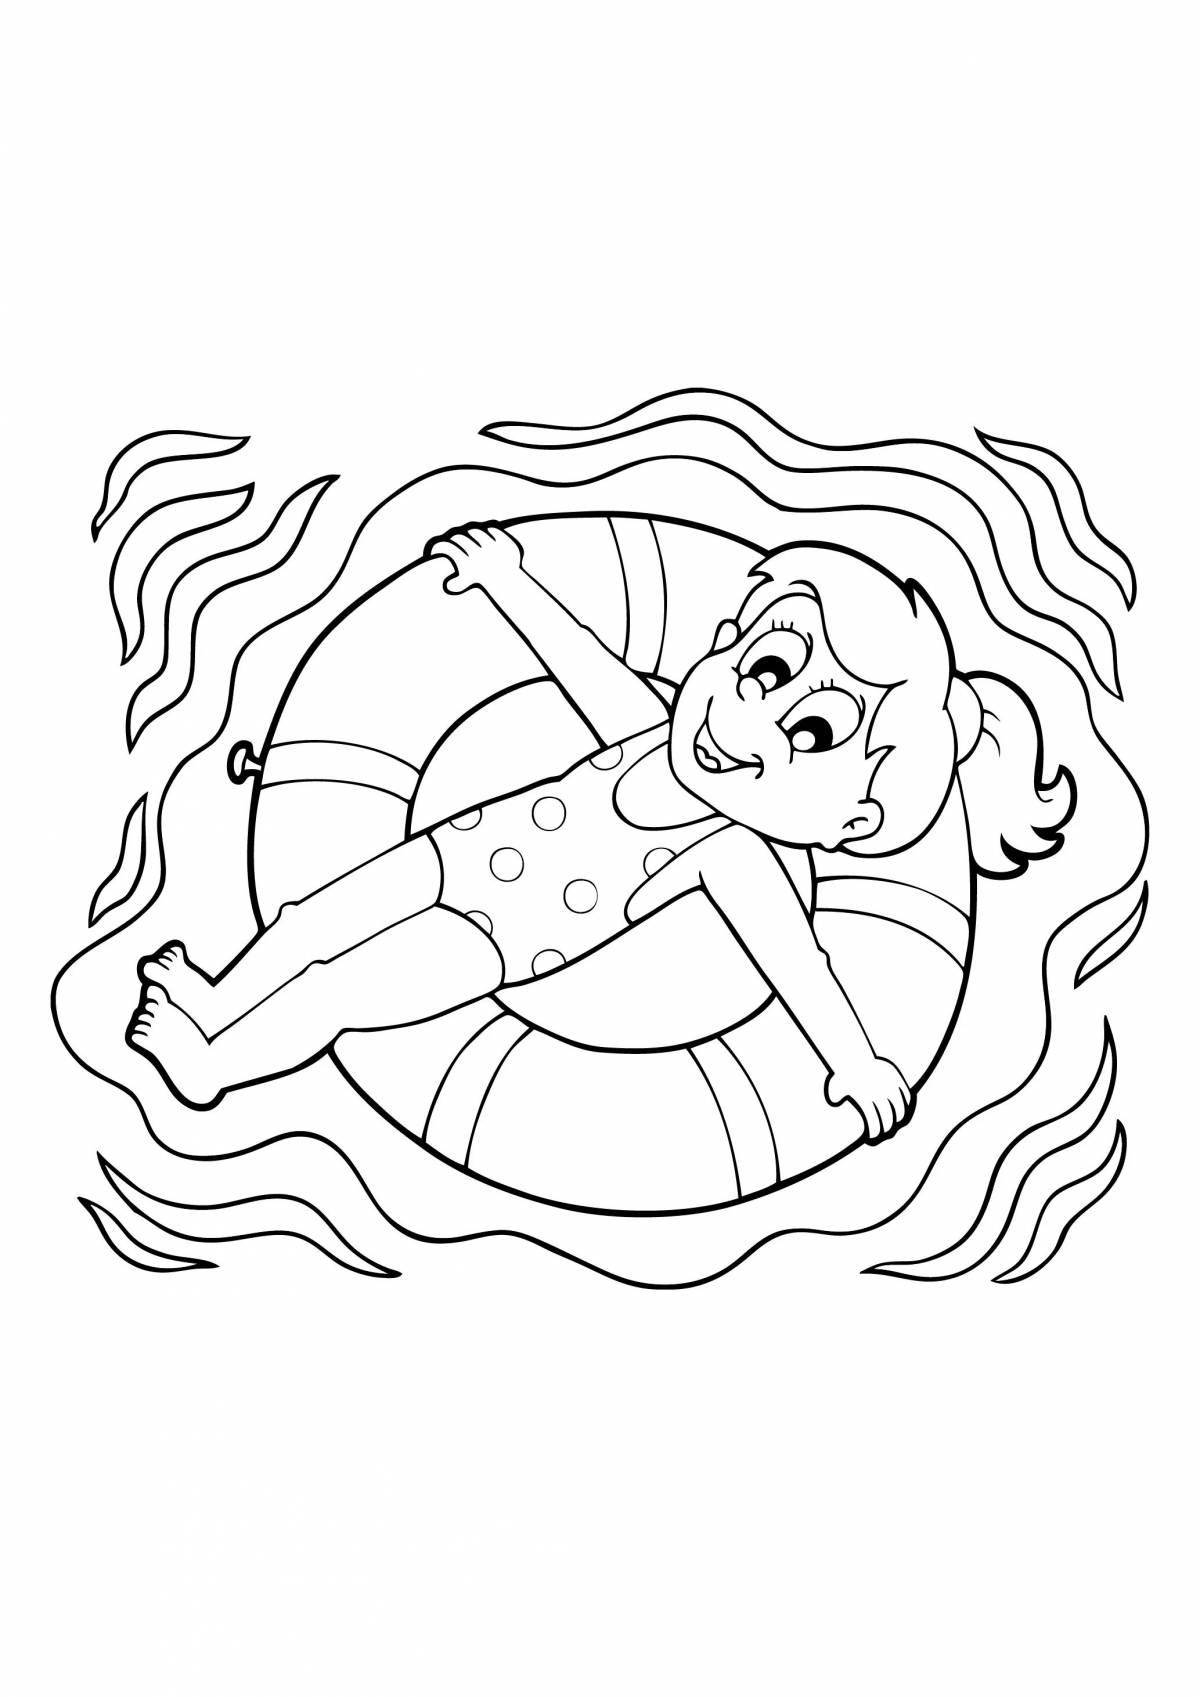 Fun life buoy coloring book for little ones